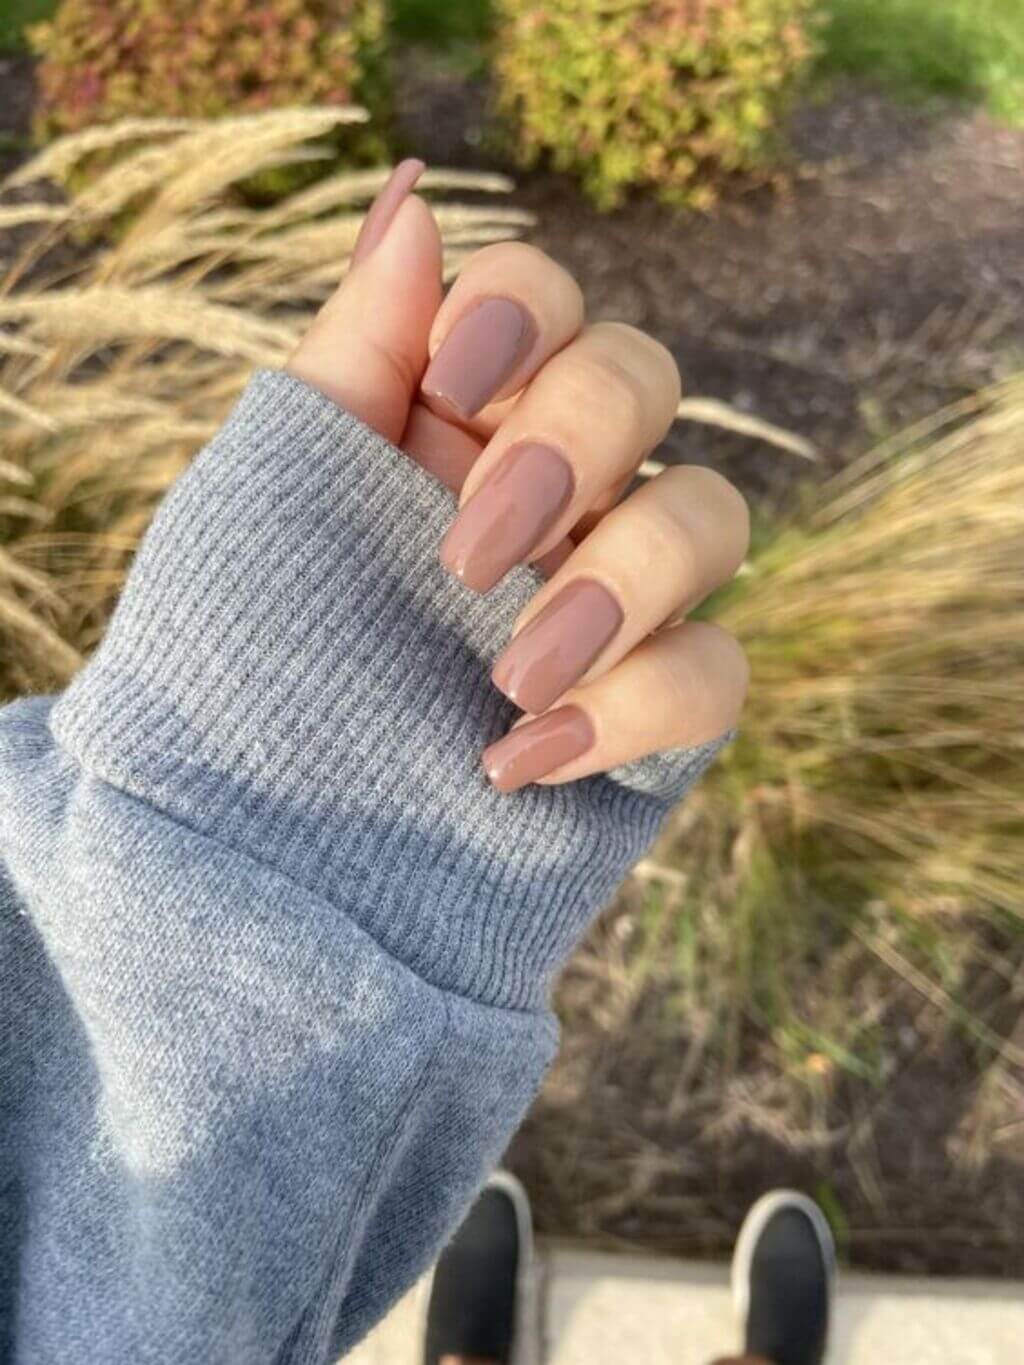 different shades of brown nails